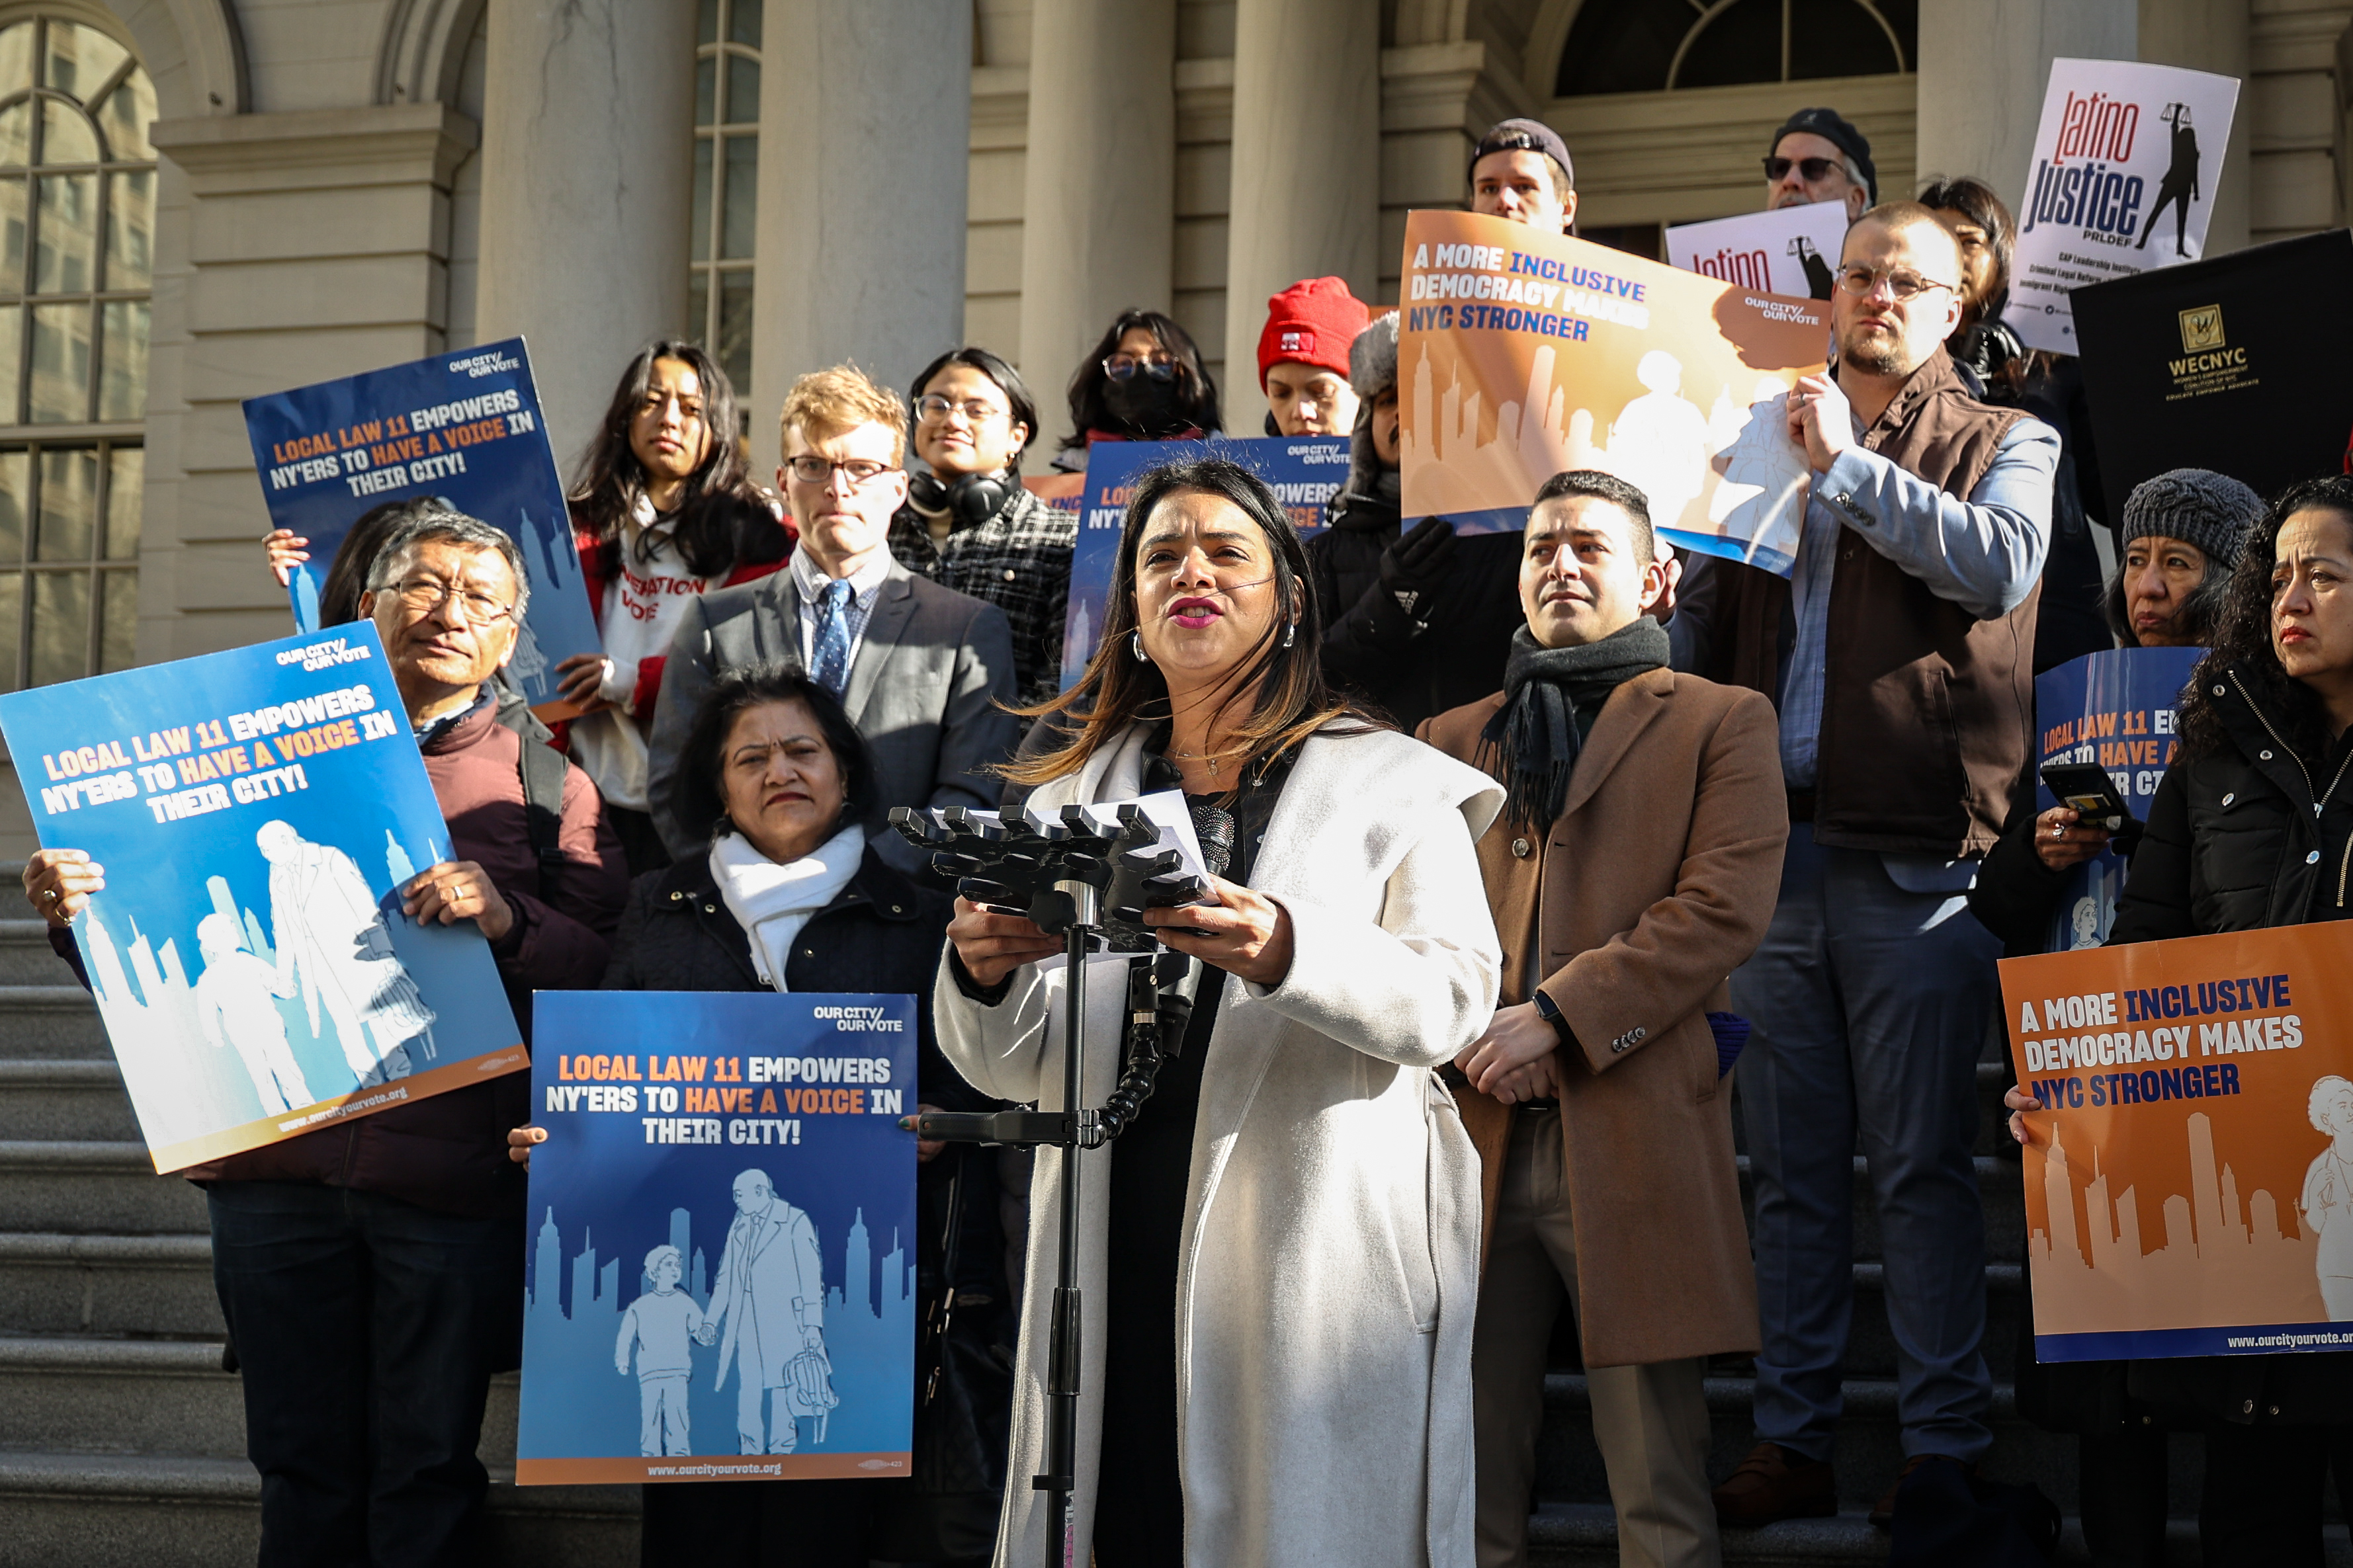 Eva Santos Veloz, in a white coat, speaks on the steps of City Hall flanked by demonstrators holding signs in favor of the local law.